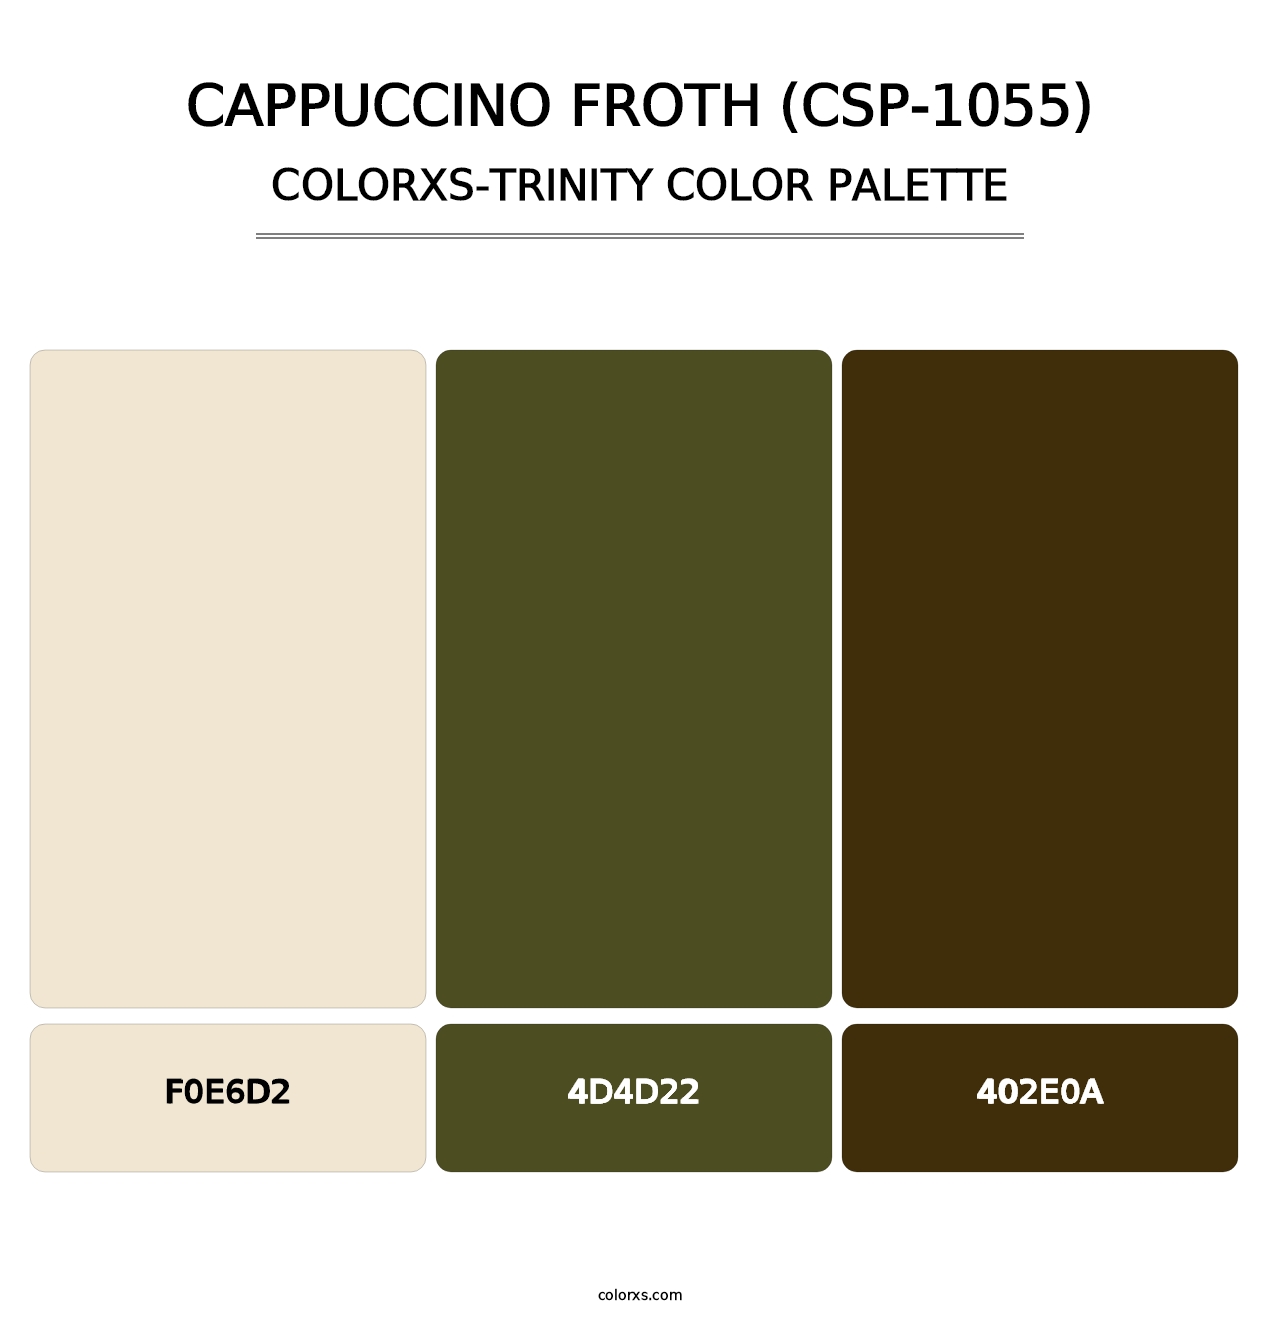 Cappuccino Froth (CSP-1055) - Colorxs Trinity Palette